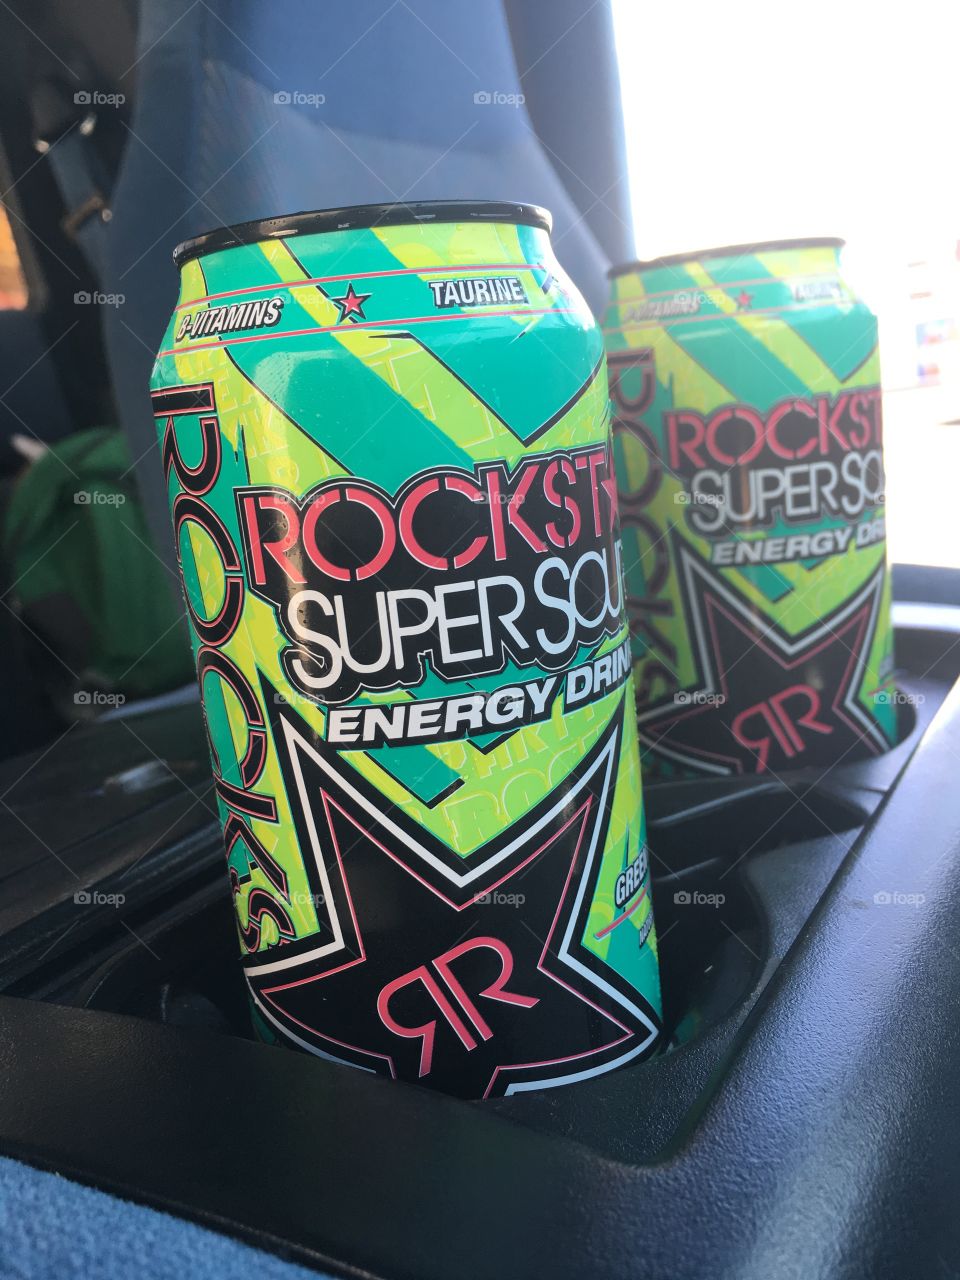 Rockstars to get us through the morning!